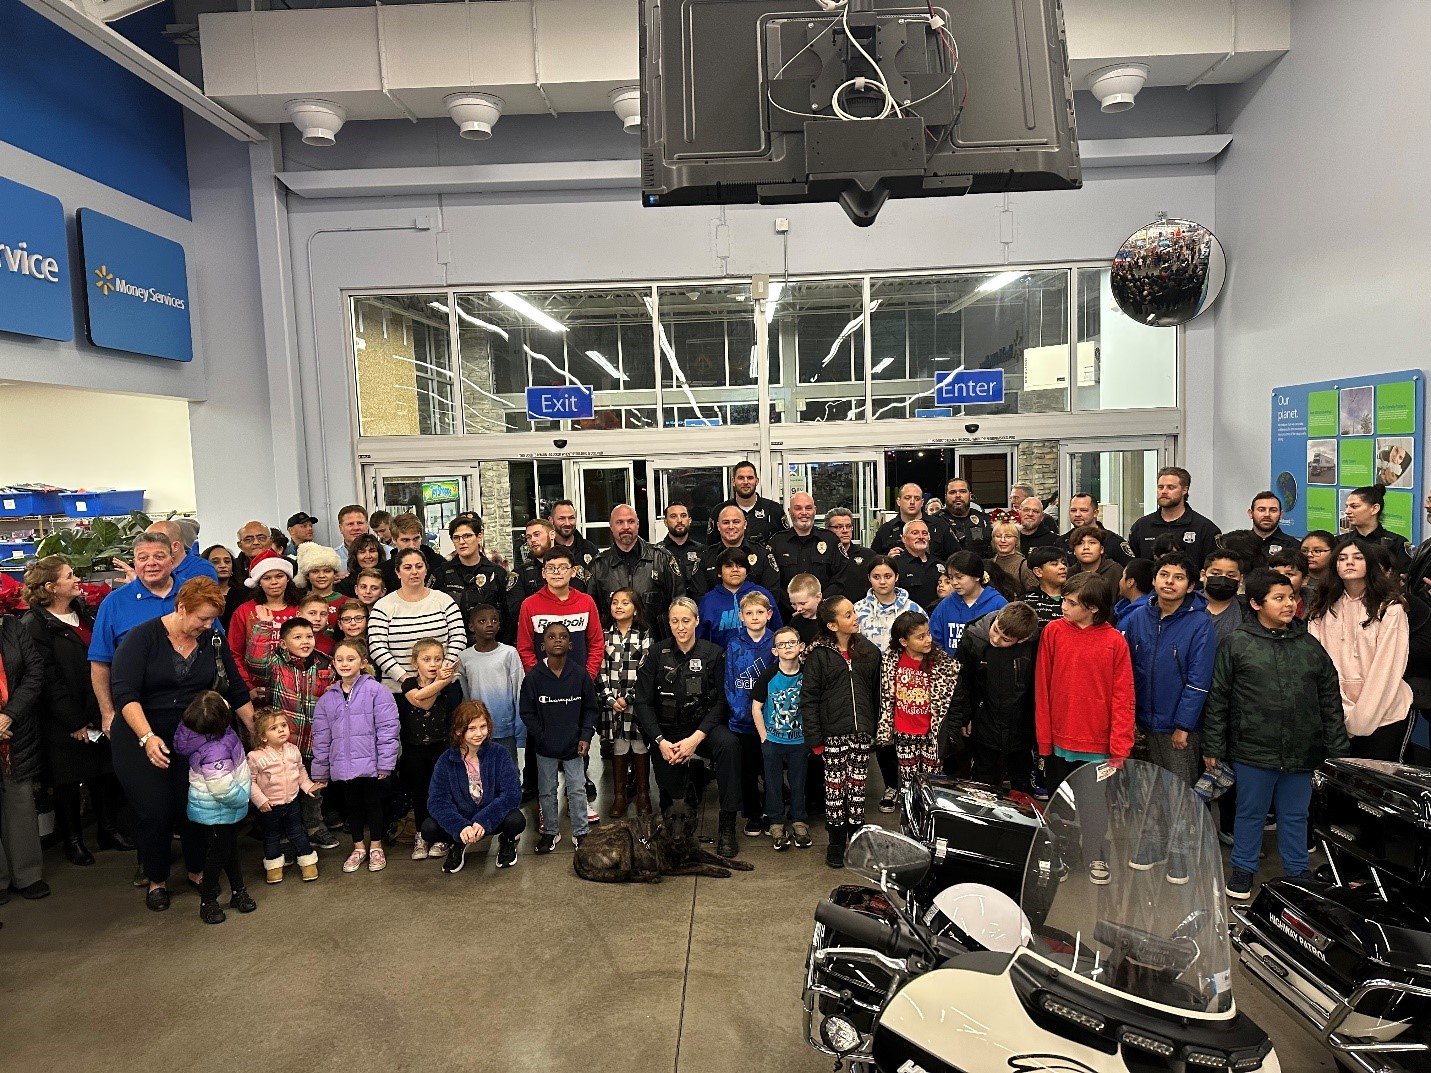 During the Warrington Township Police Department’s fifth annual “Shop with a Cop” event at the Warrington Walmart, 22 officers shop with 35 elementary school students who live in Warrington.